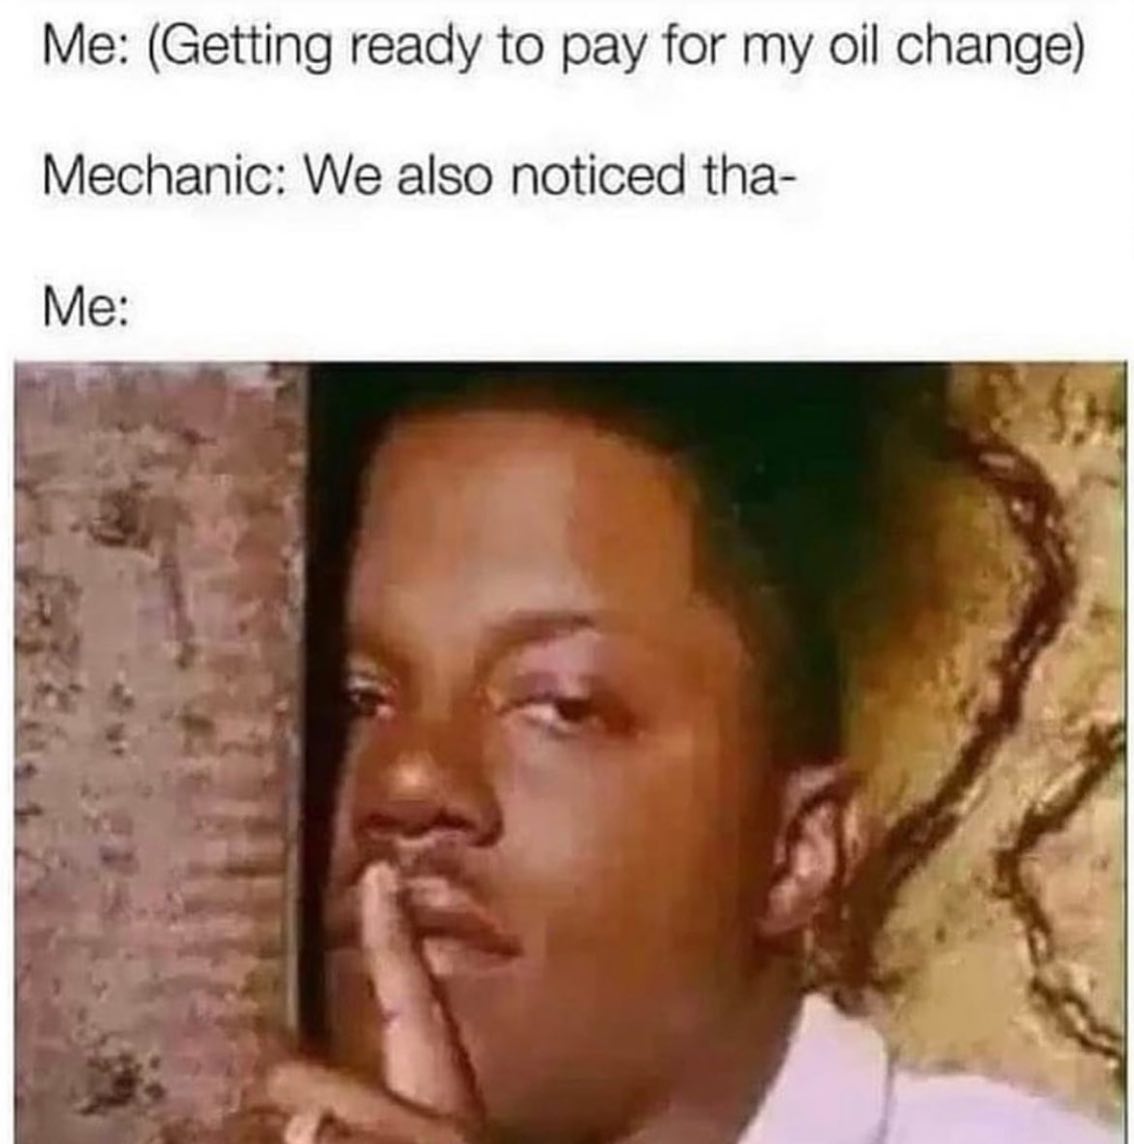 relatable memes - me getting ready to pay for my oil change - Me Getting ready to pay for my oil change Mechanic We also noticed tha Me